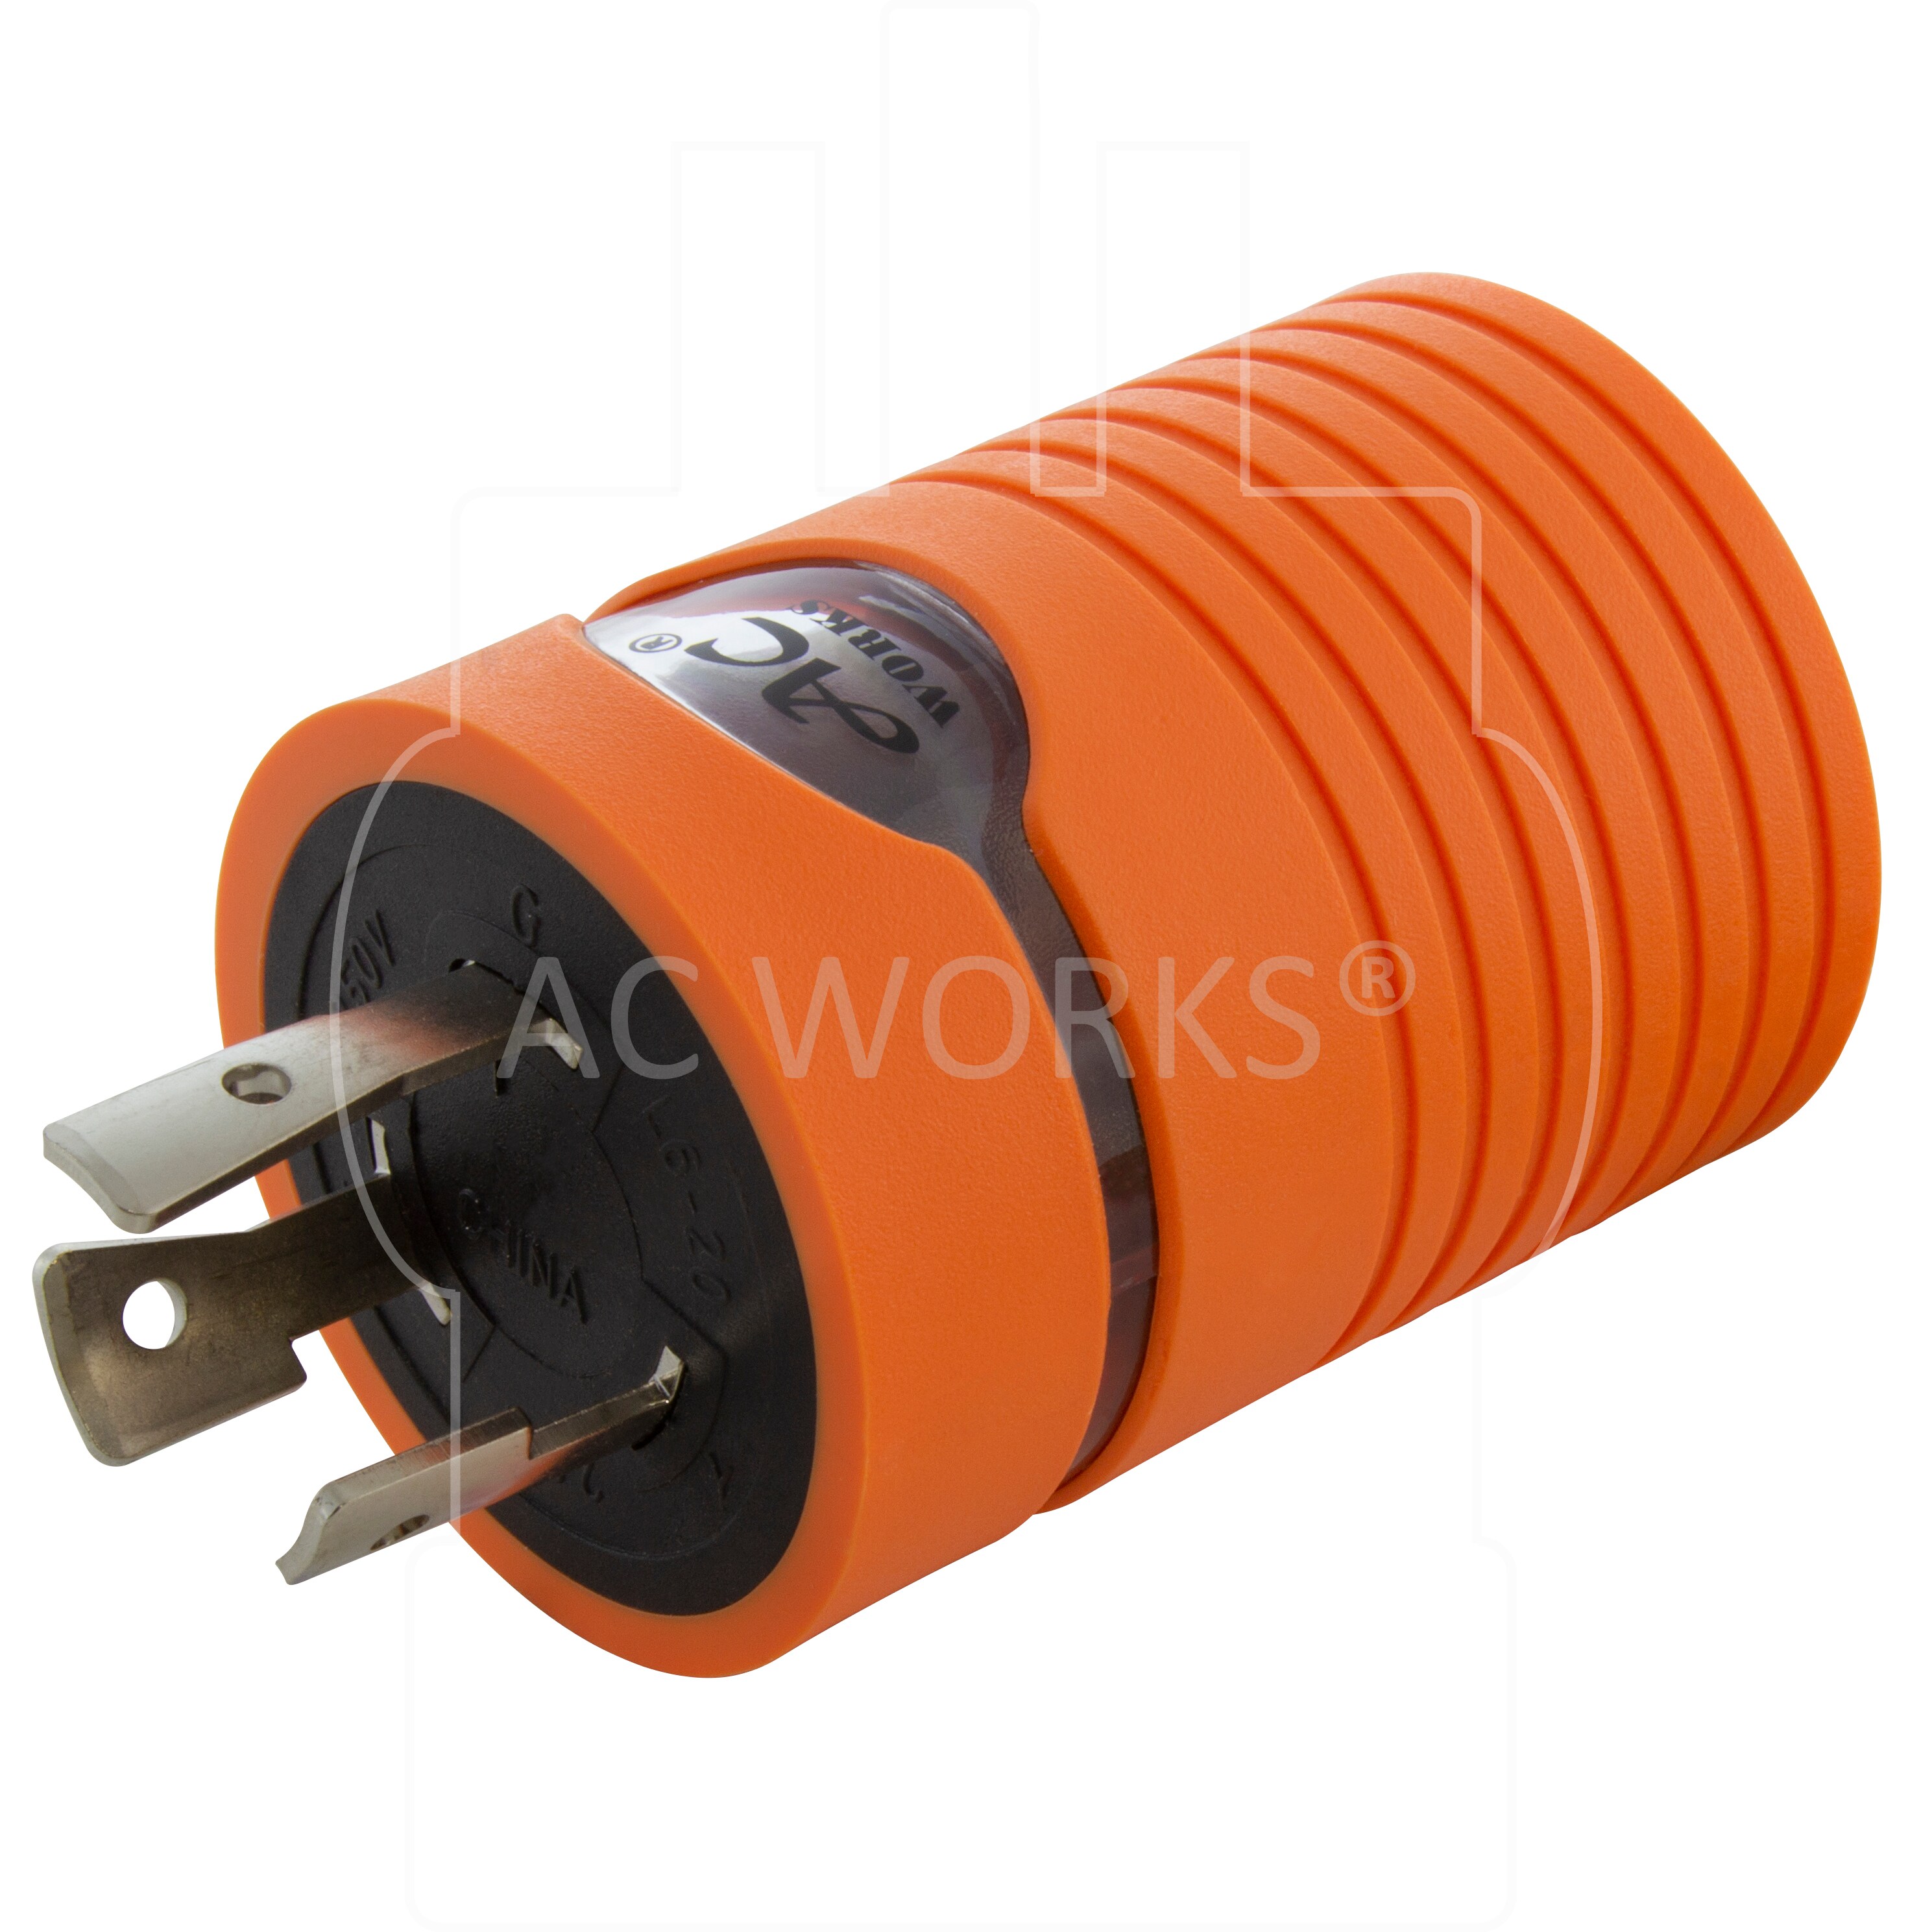 Compact Industrial Adapter NEMA 6-20P to NEMA L6-20R by AC WORKS® 